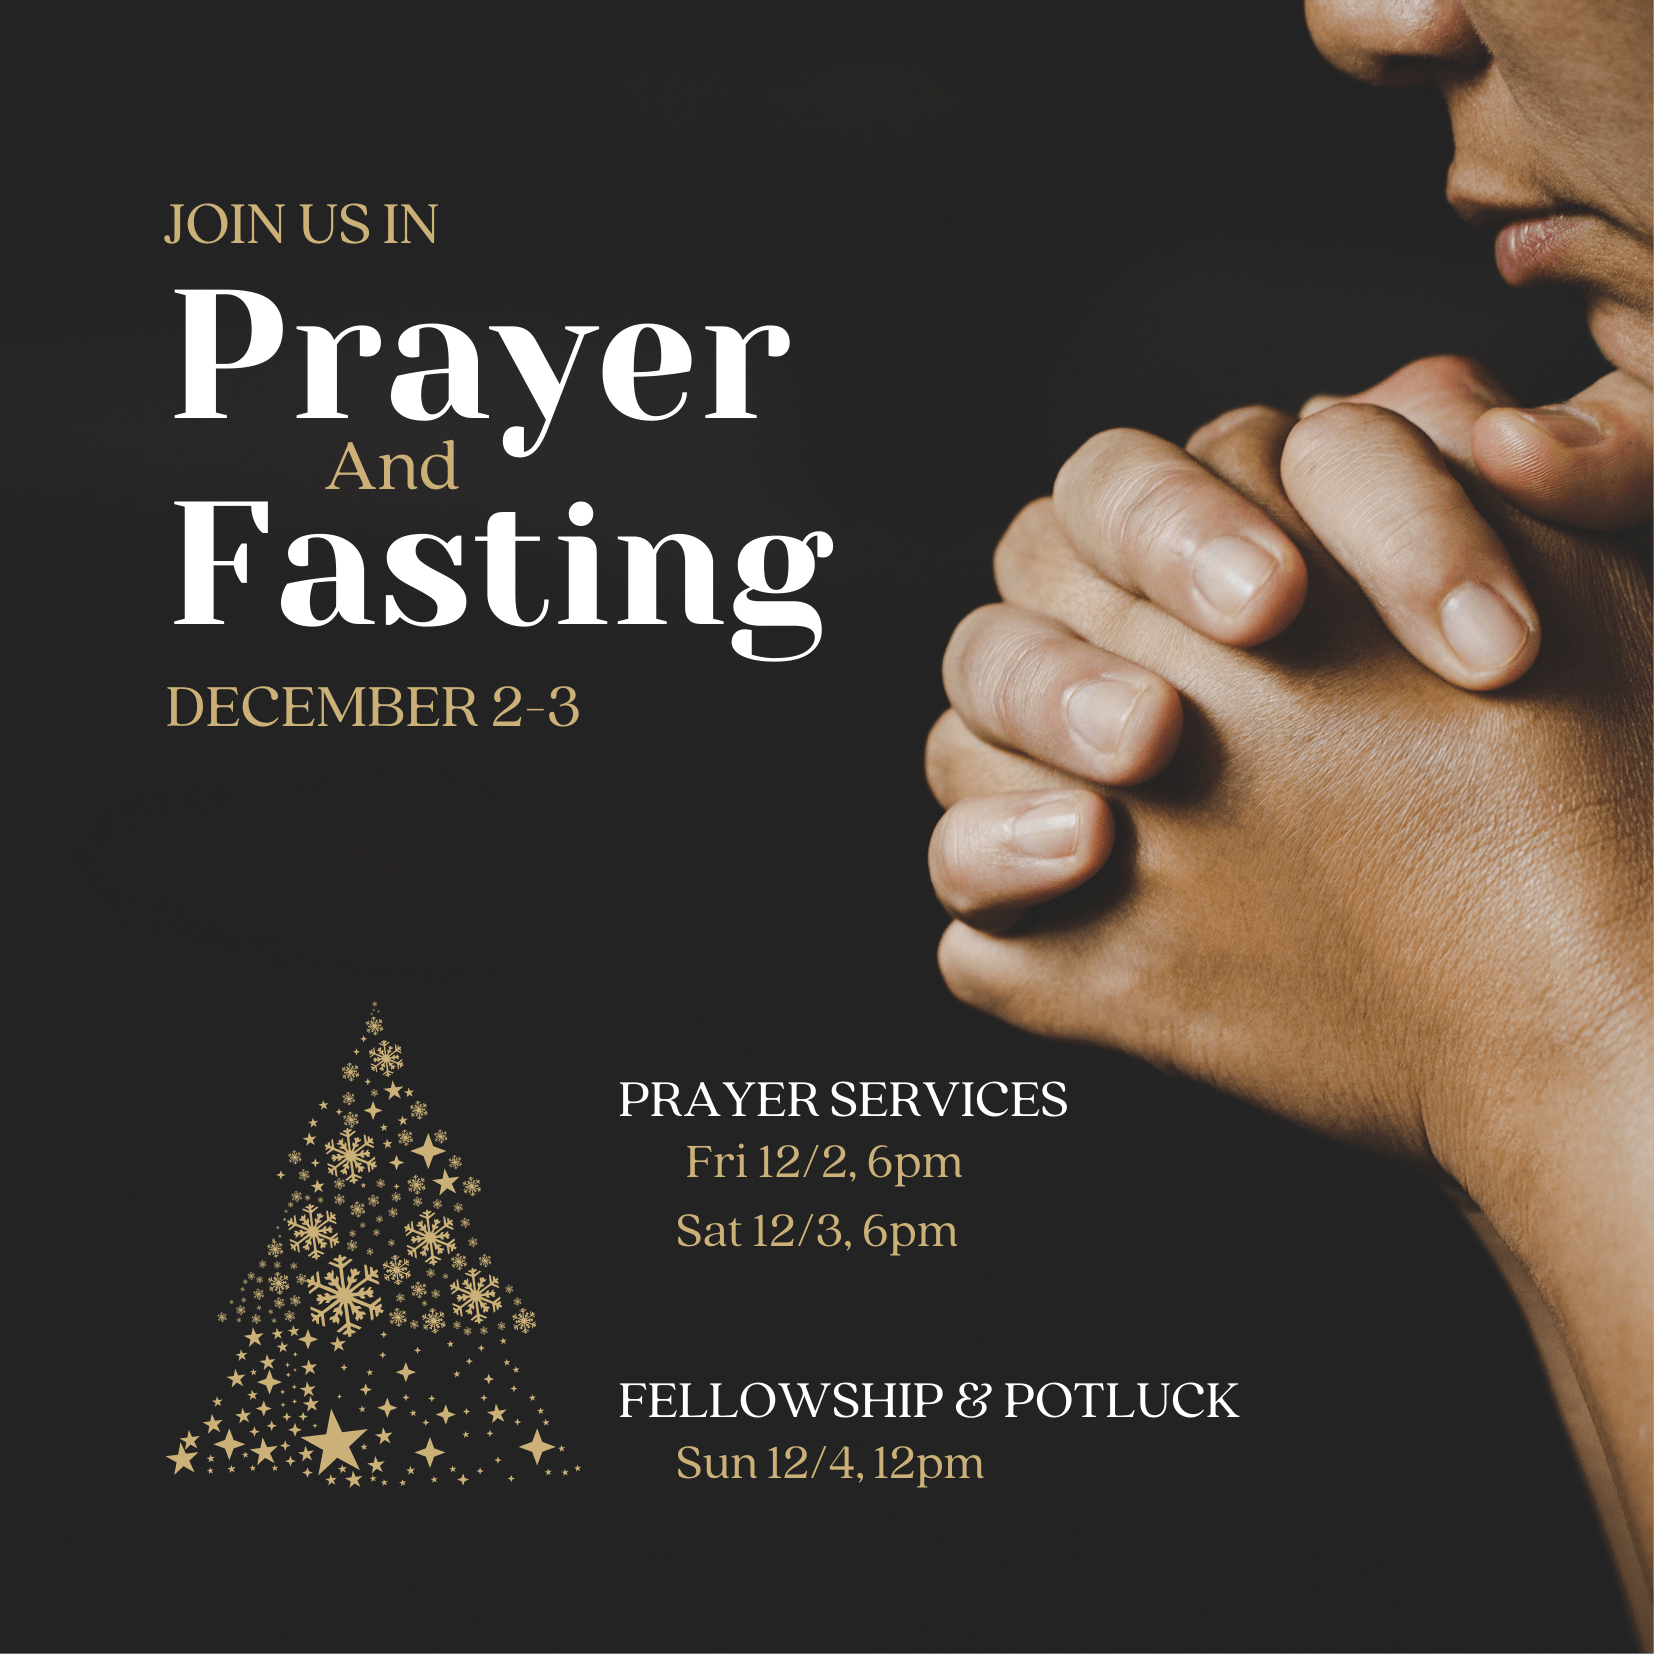 Join us for prayer & fasting December 2-3. Special Prayer services 6pm both evenings.